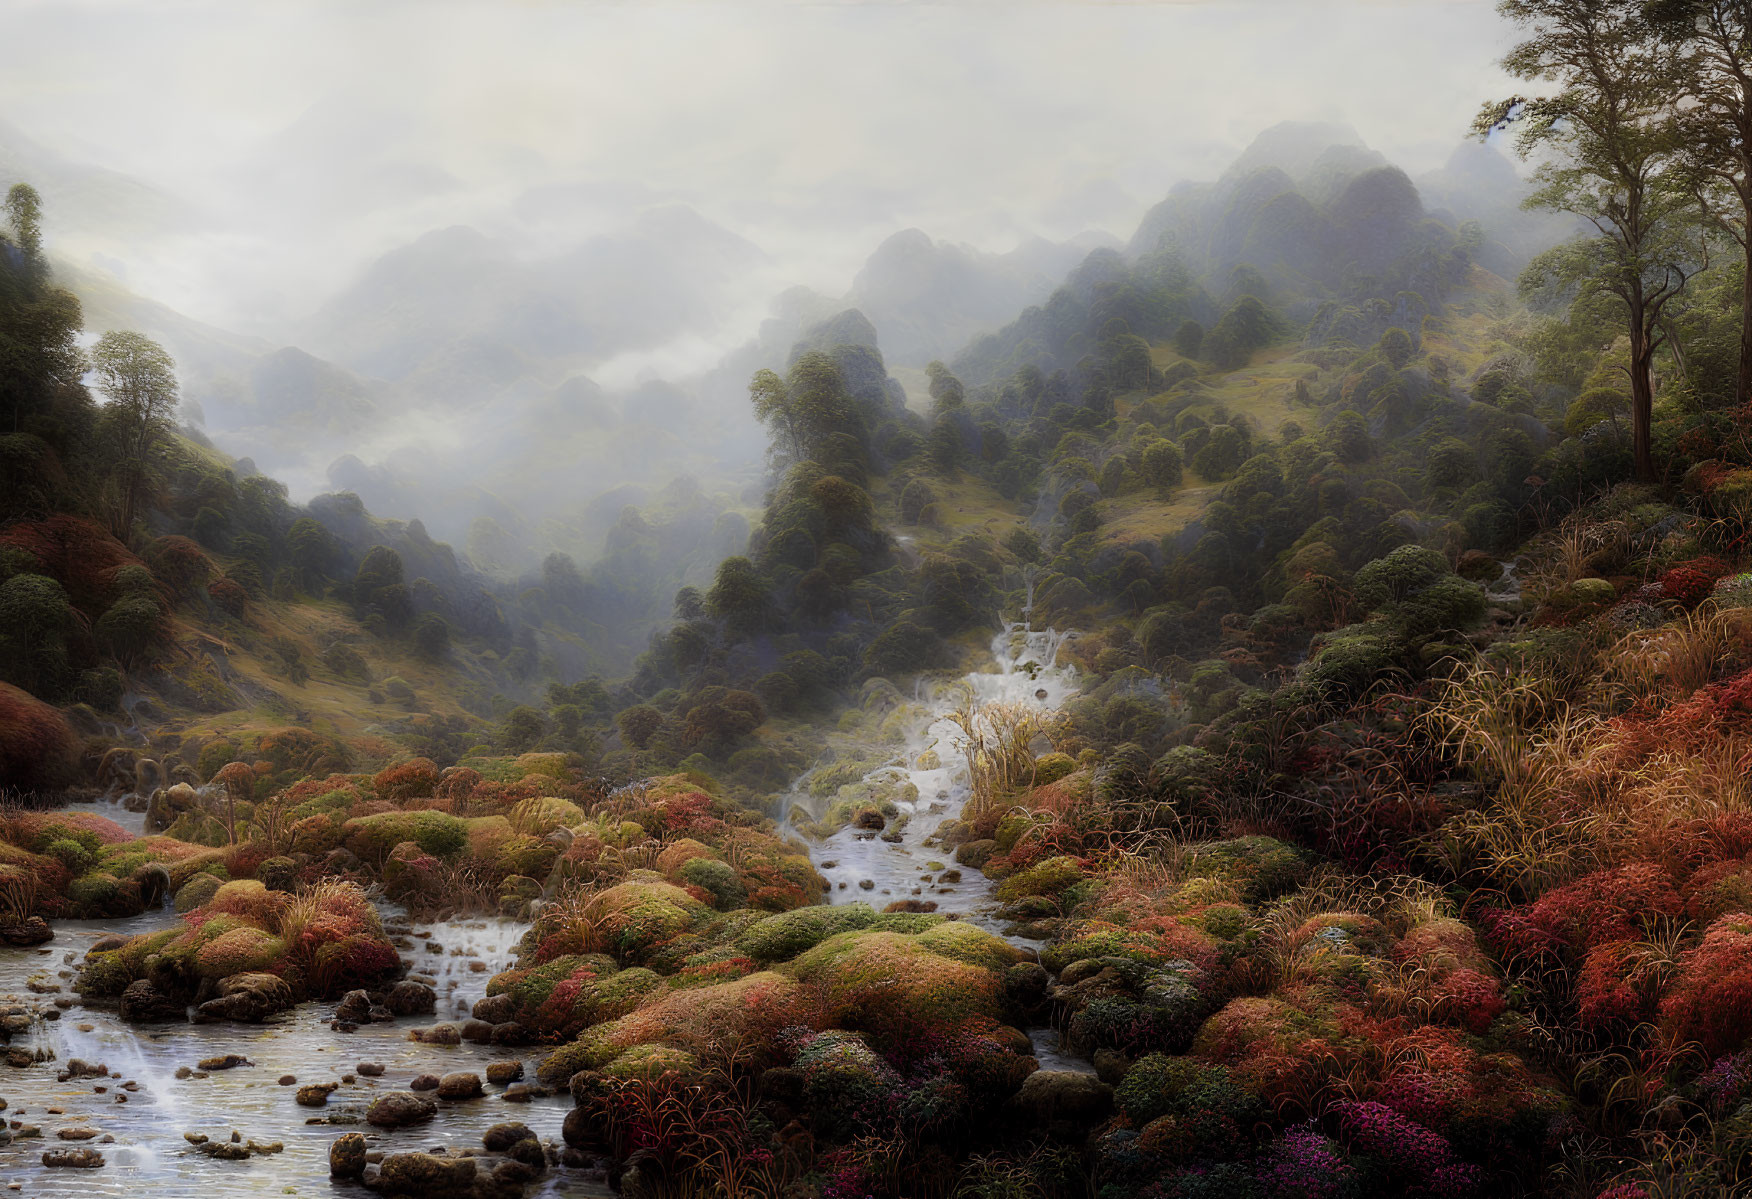 Tranquil landscape with misty hills, stream, and vibrant foliage